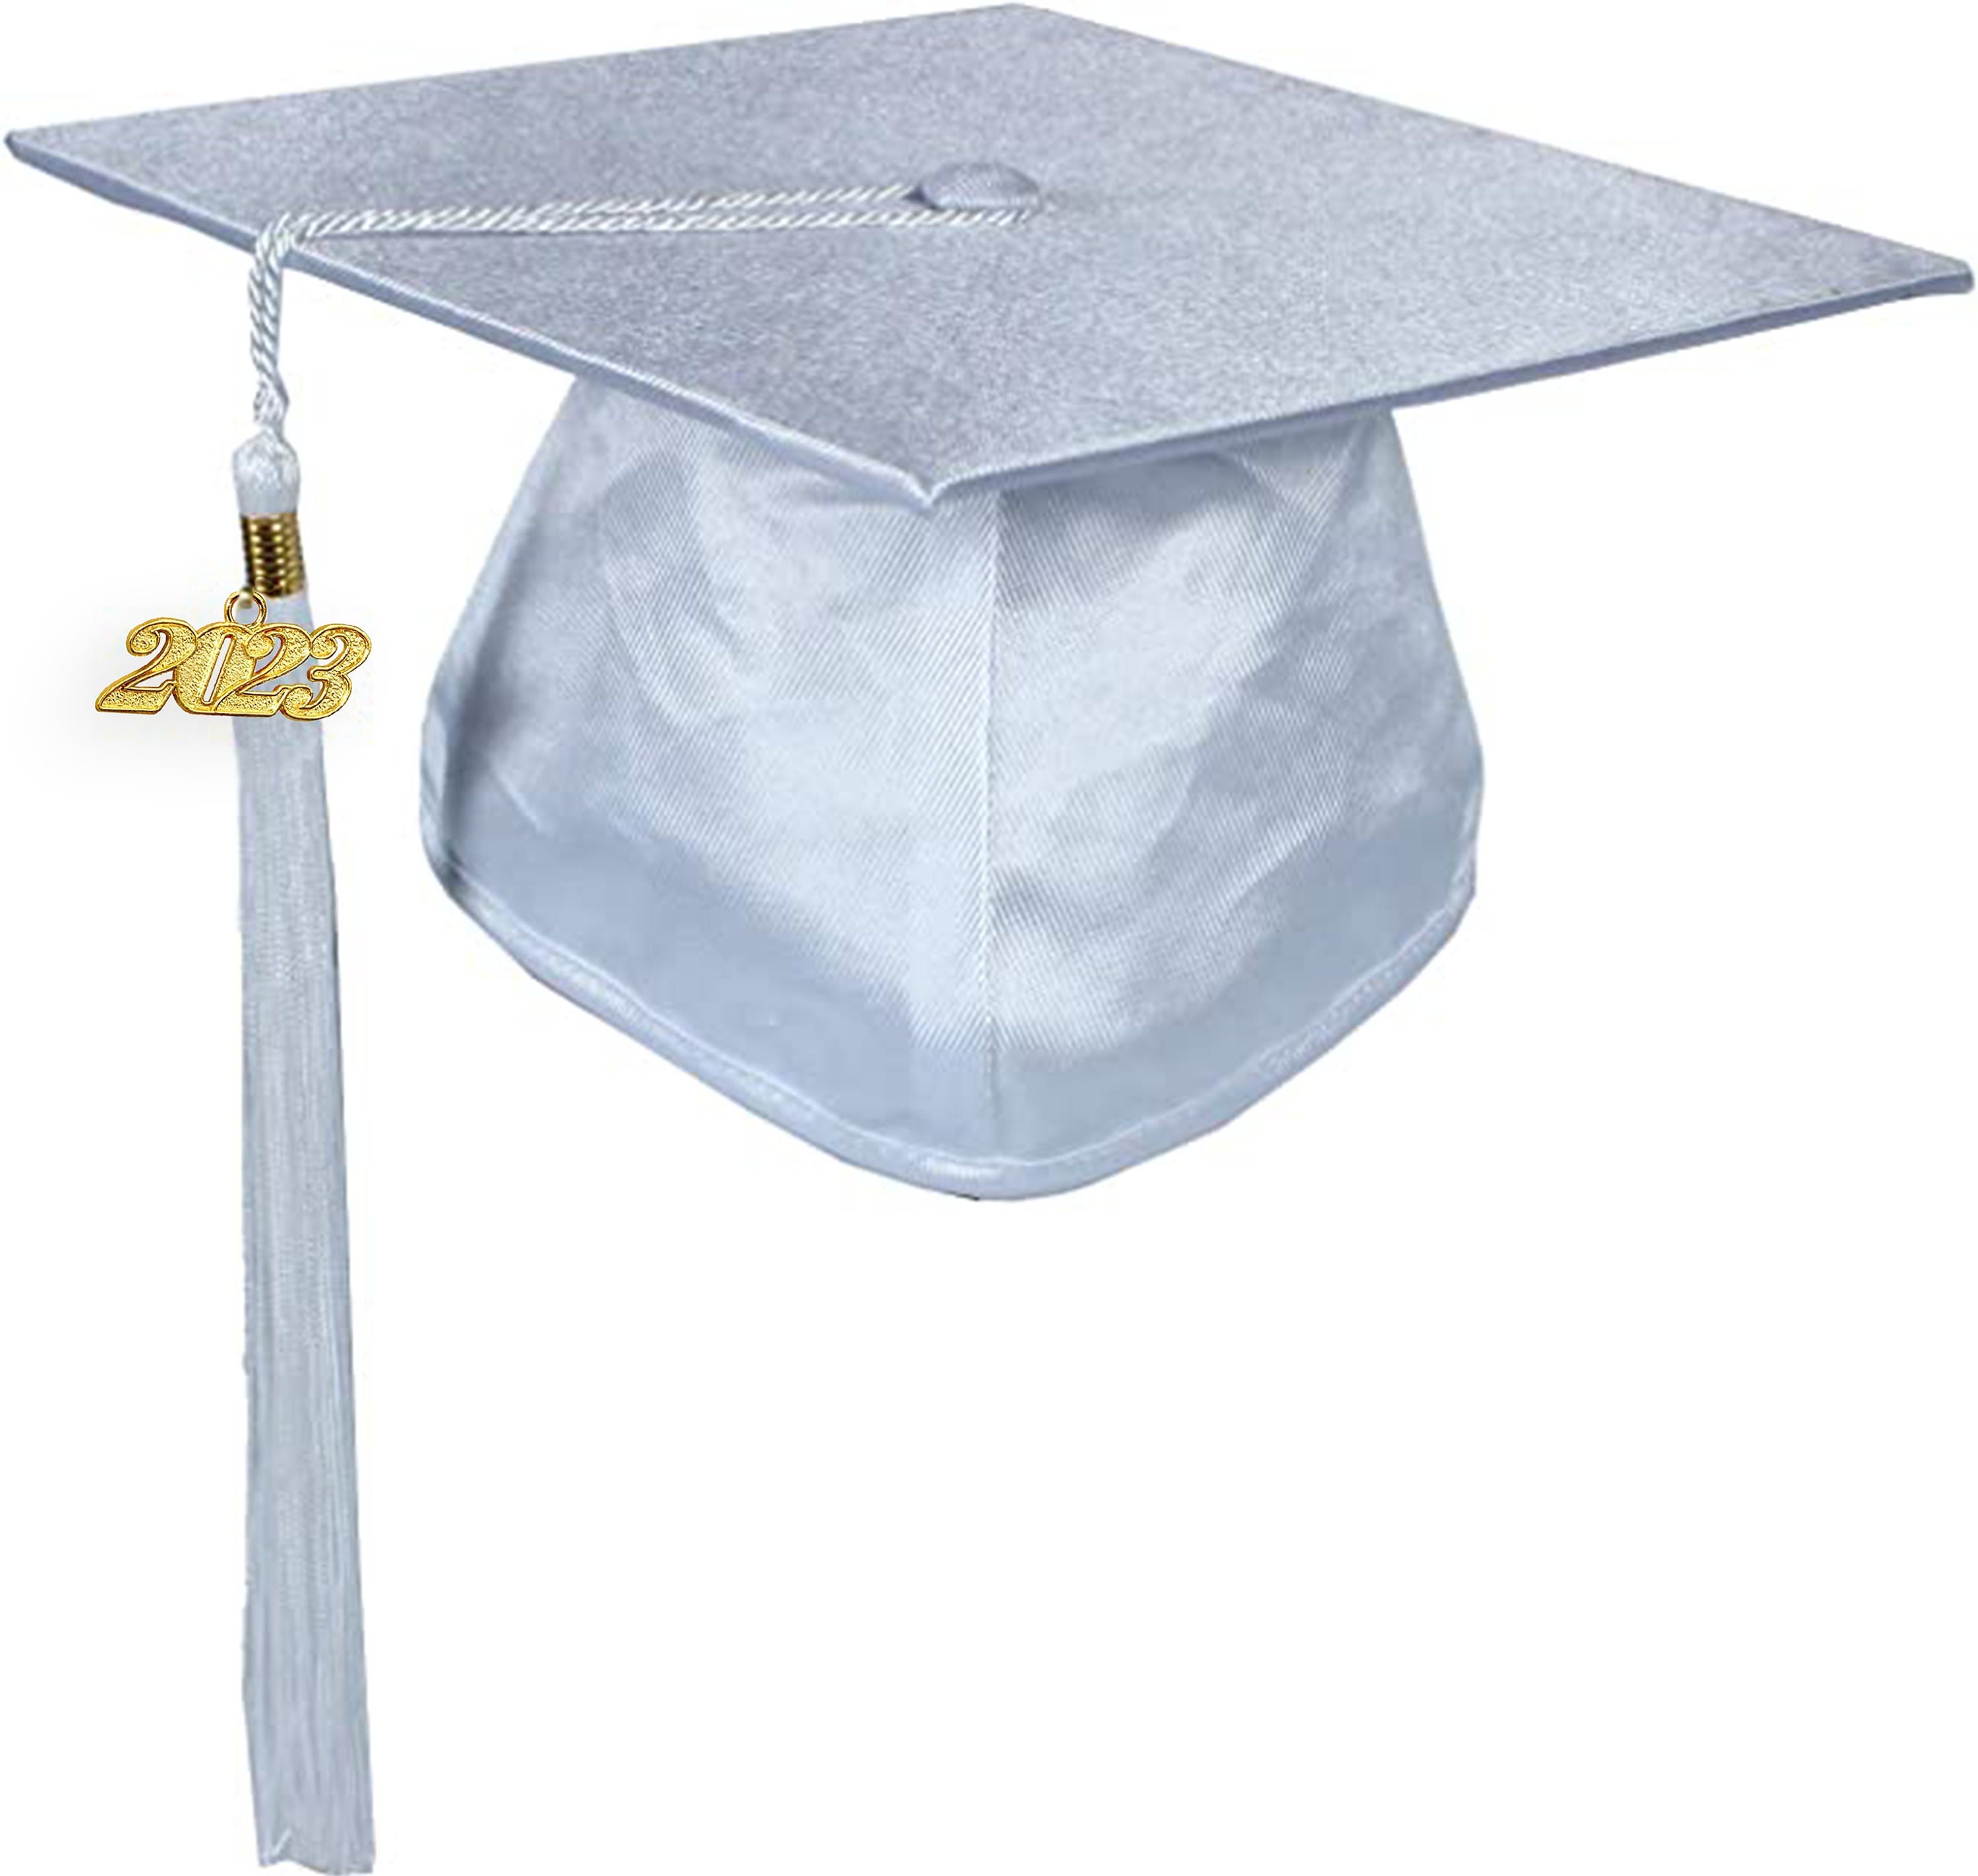 Tassels for Graduation Caps - Many Colors and Styles